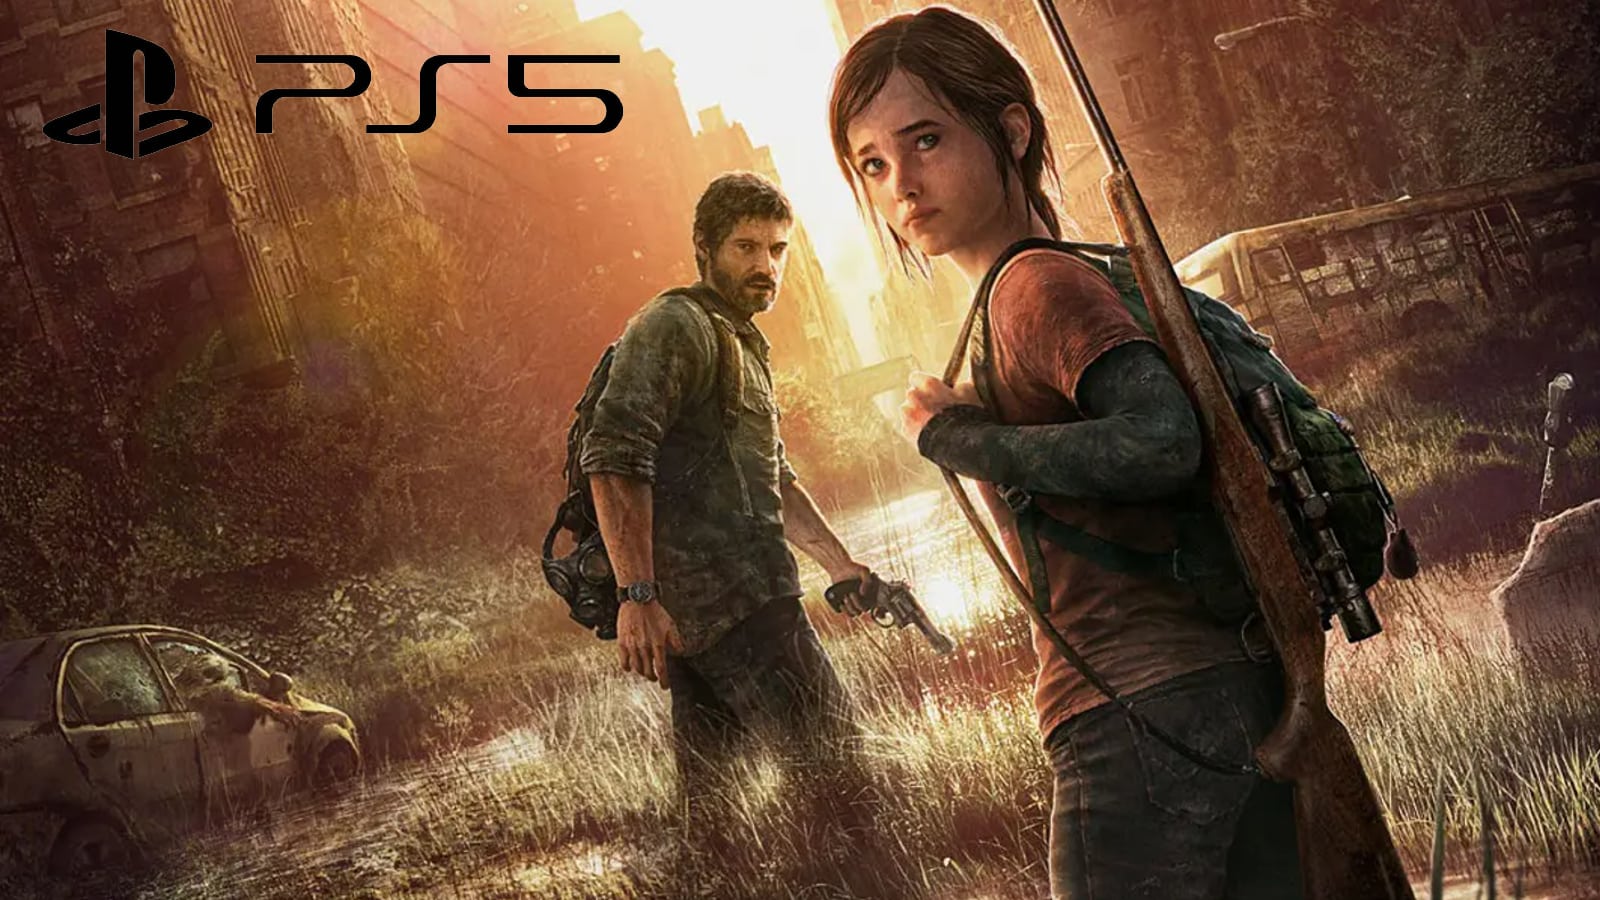 The Last of Us remake for PS5: All rumors & leaks so far about TLOU remaster